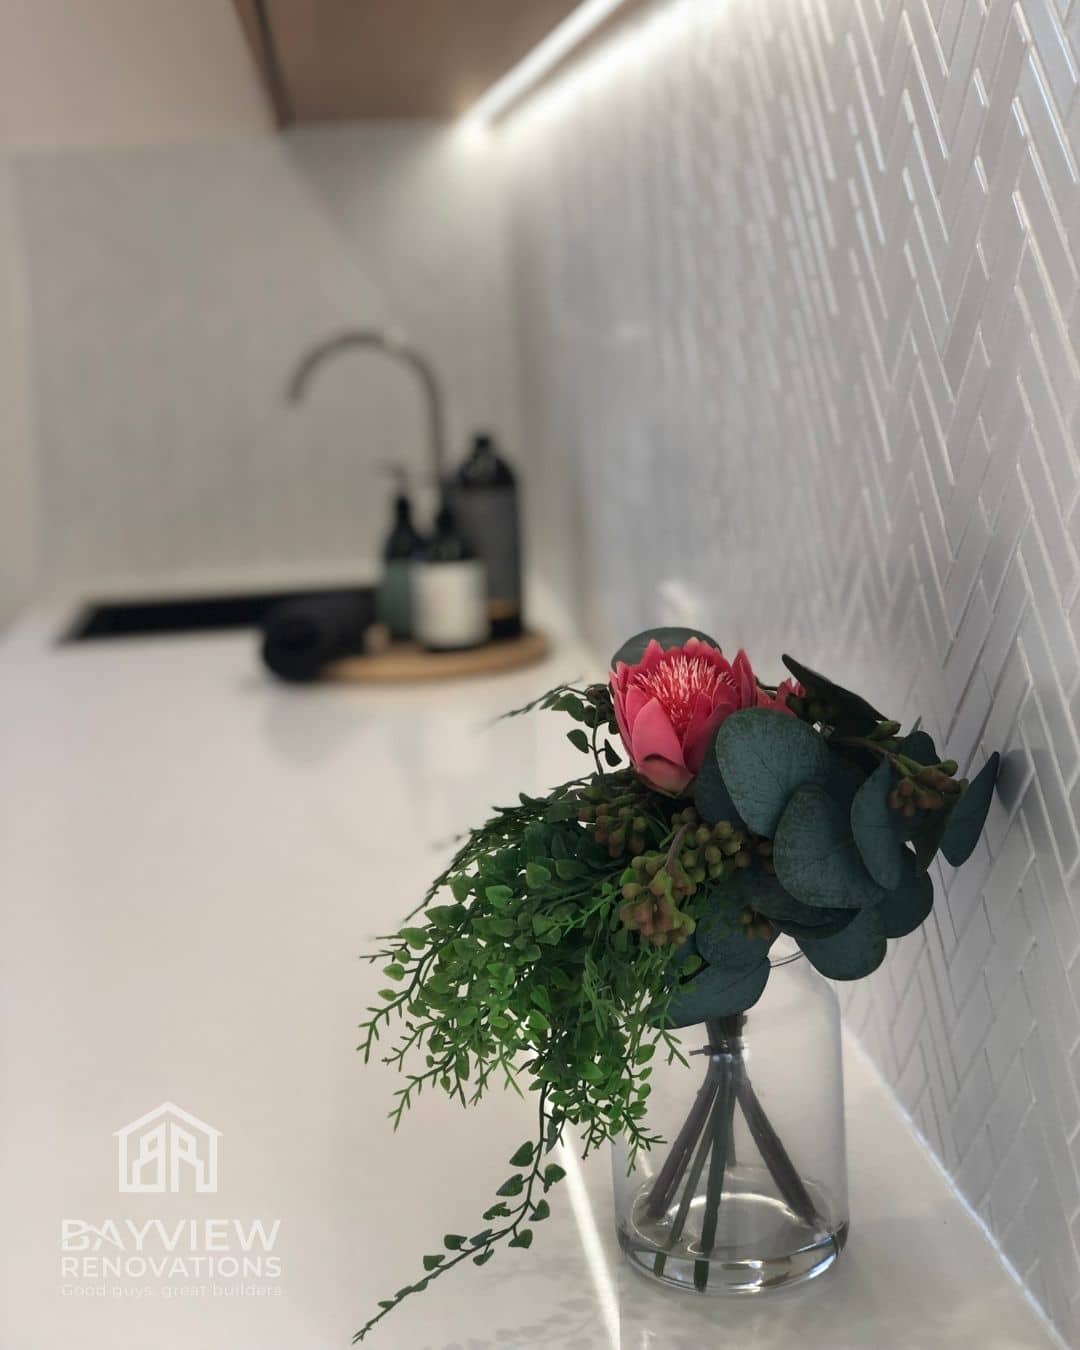 a vase with flowers in it in front of a sink